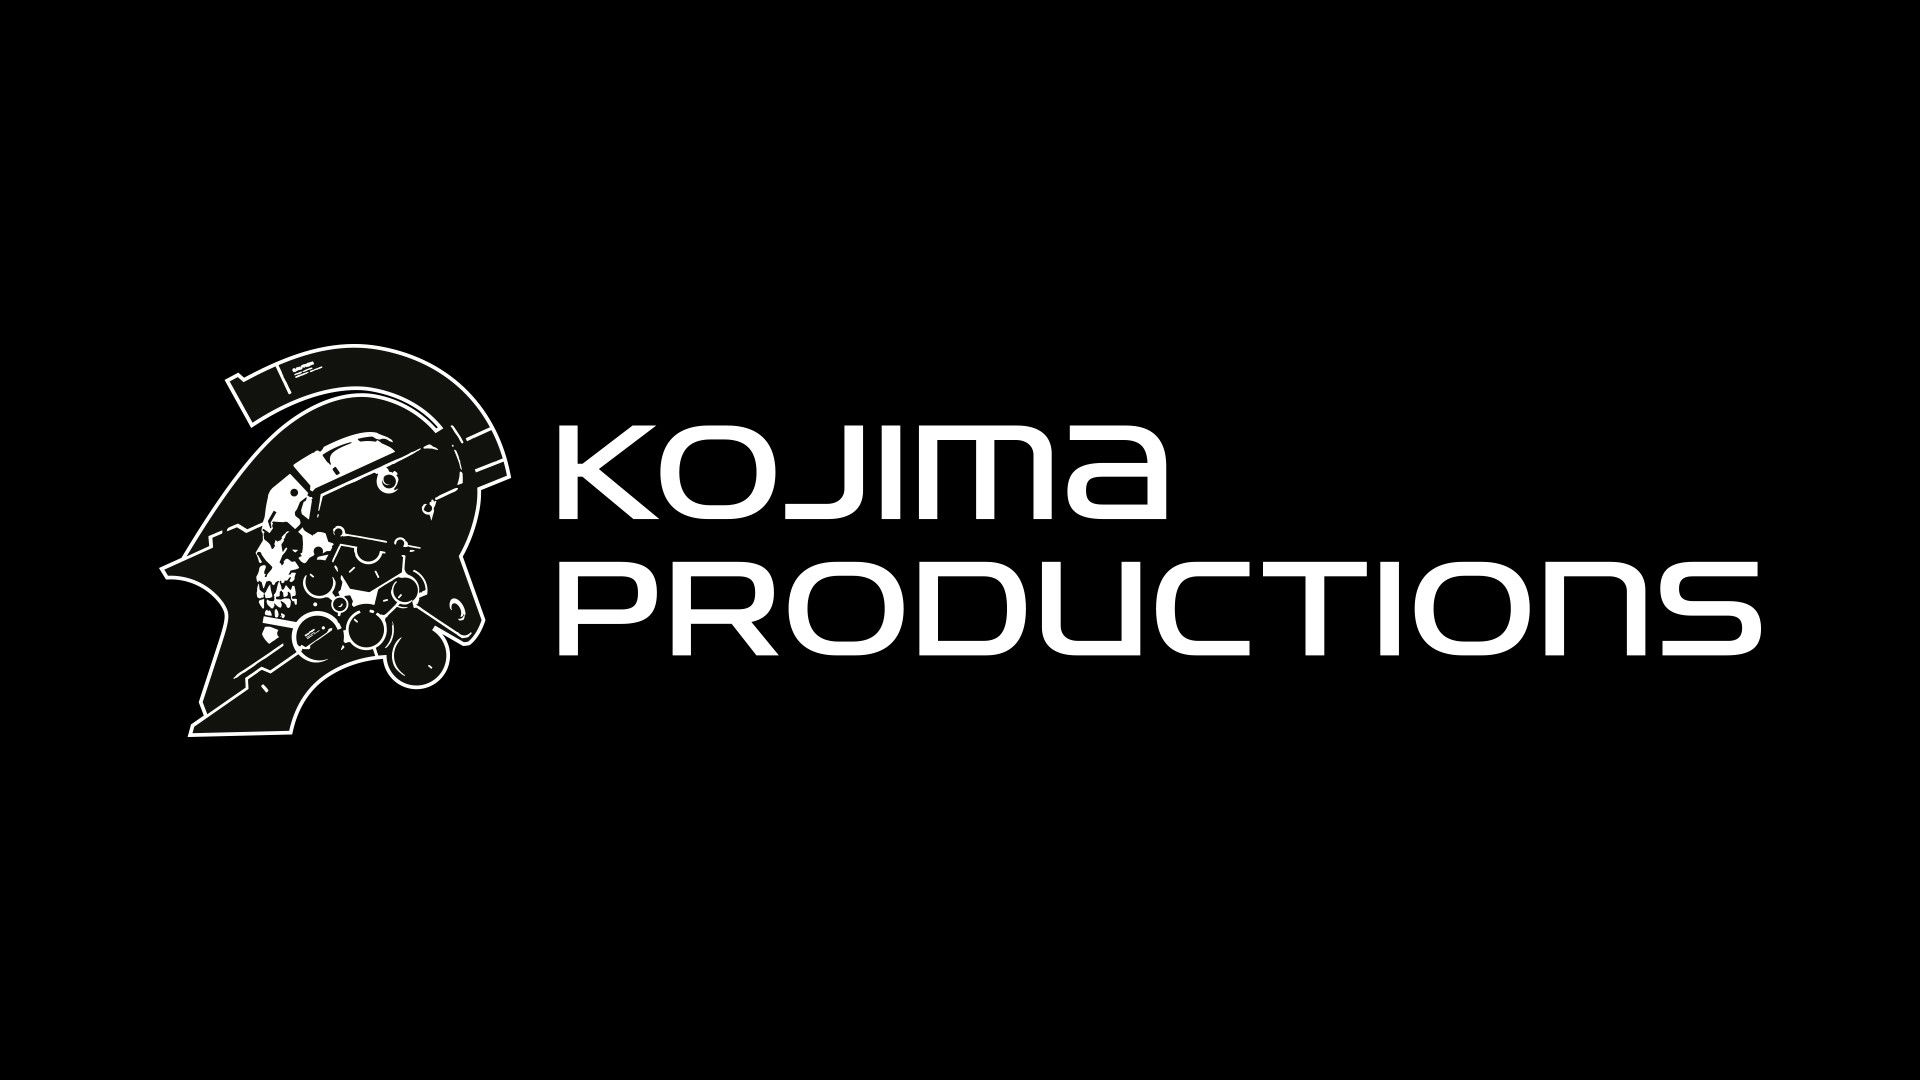 Kojima Productions Art Director Says New Game Announcement Should Come 